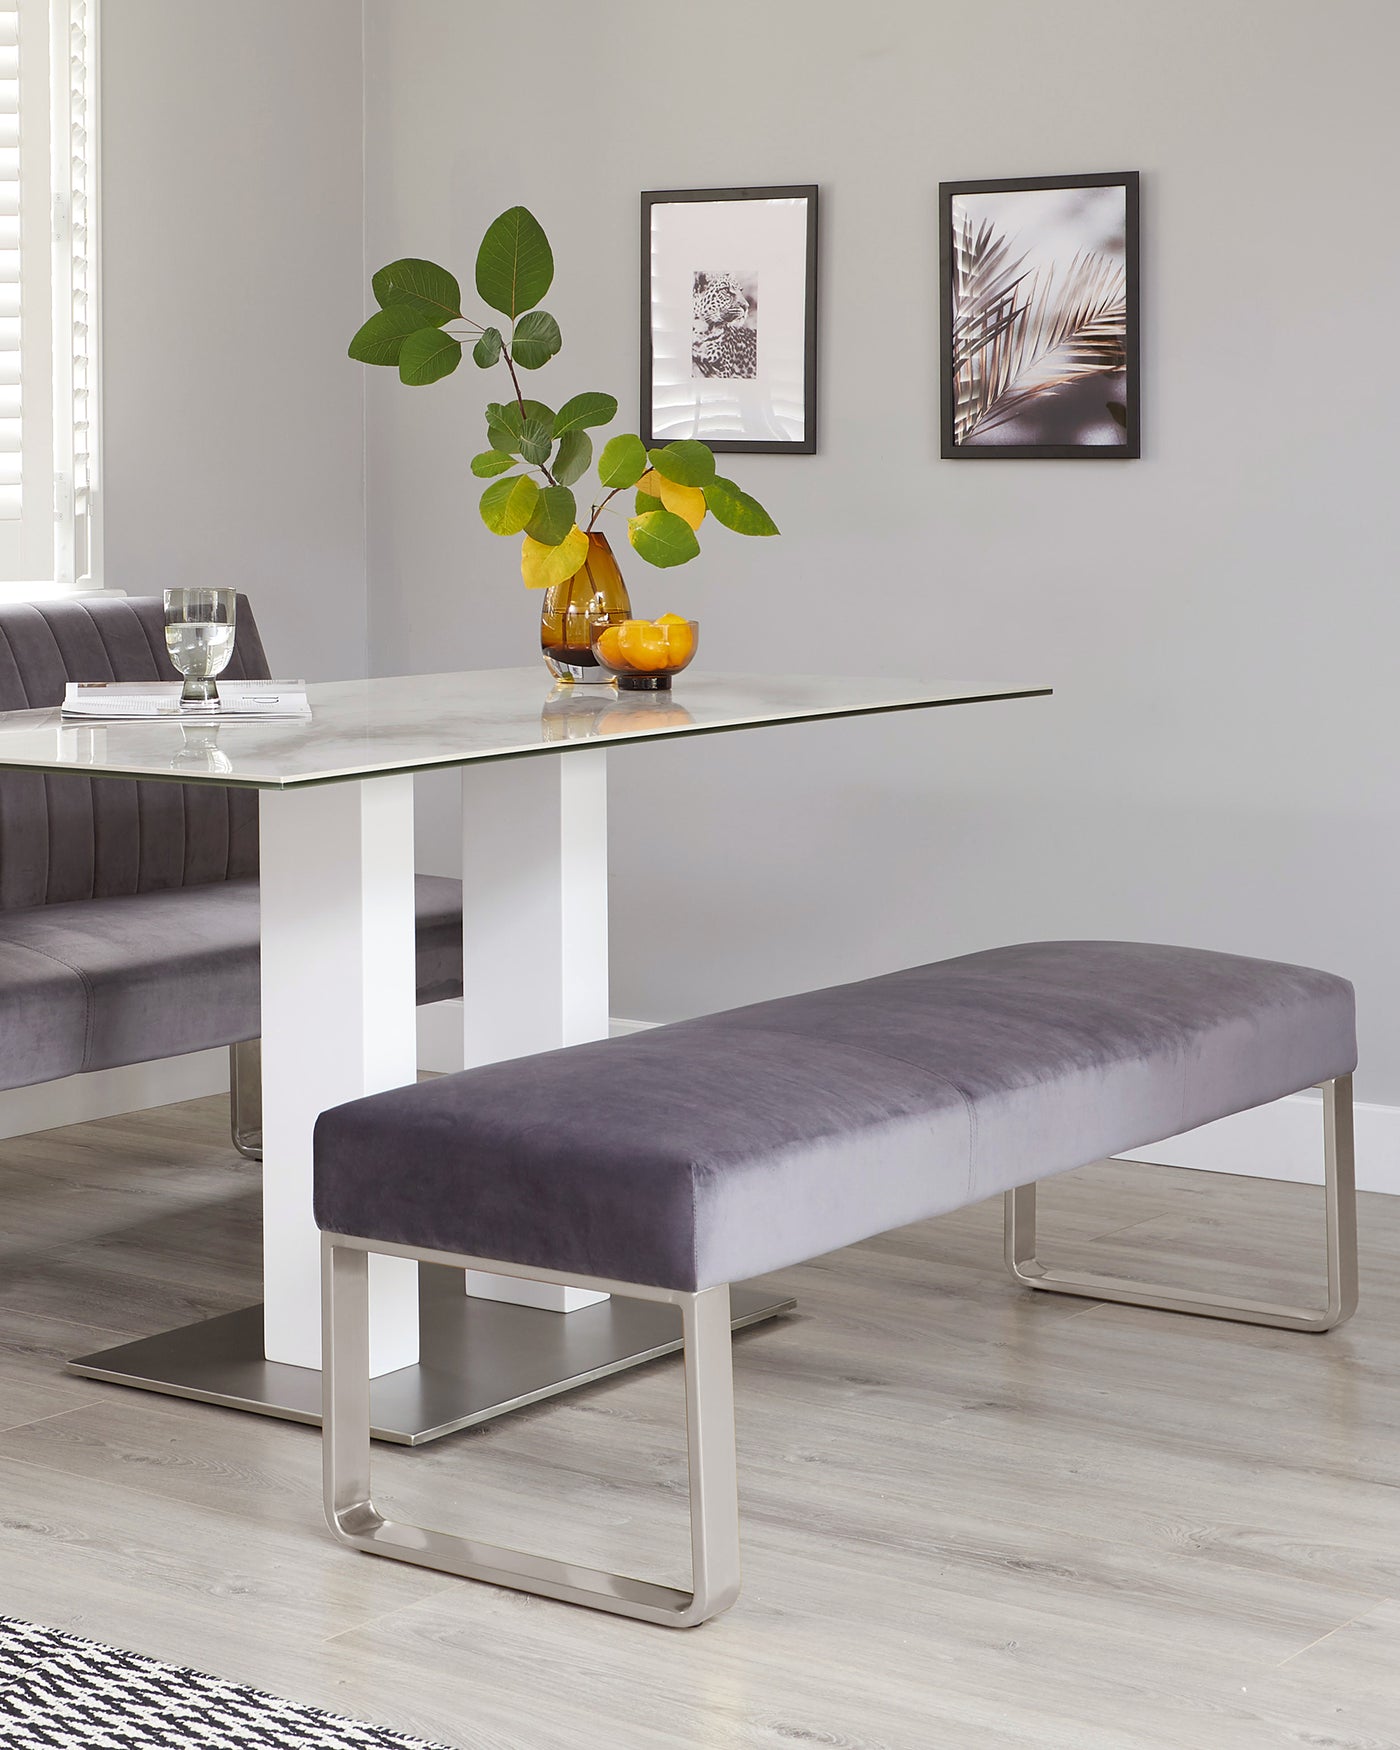 Modern dining furniture set featuring a sleek rectangular glass tabletop with white high-gloss legs, paired with a matching grey tufted upholstered bench with a unique U-shaped metallic base.